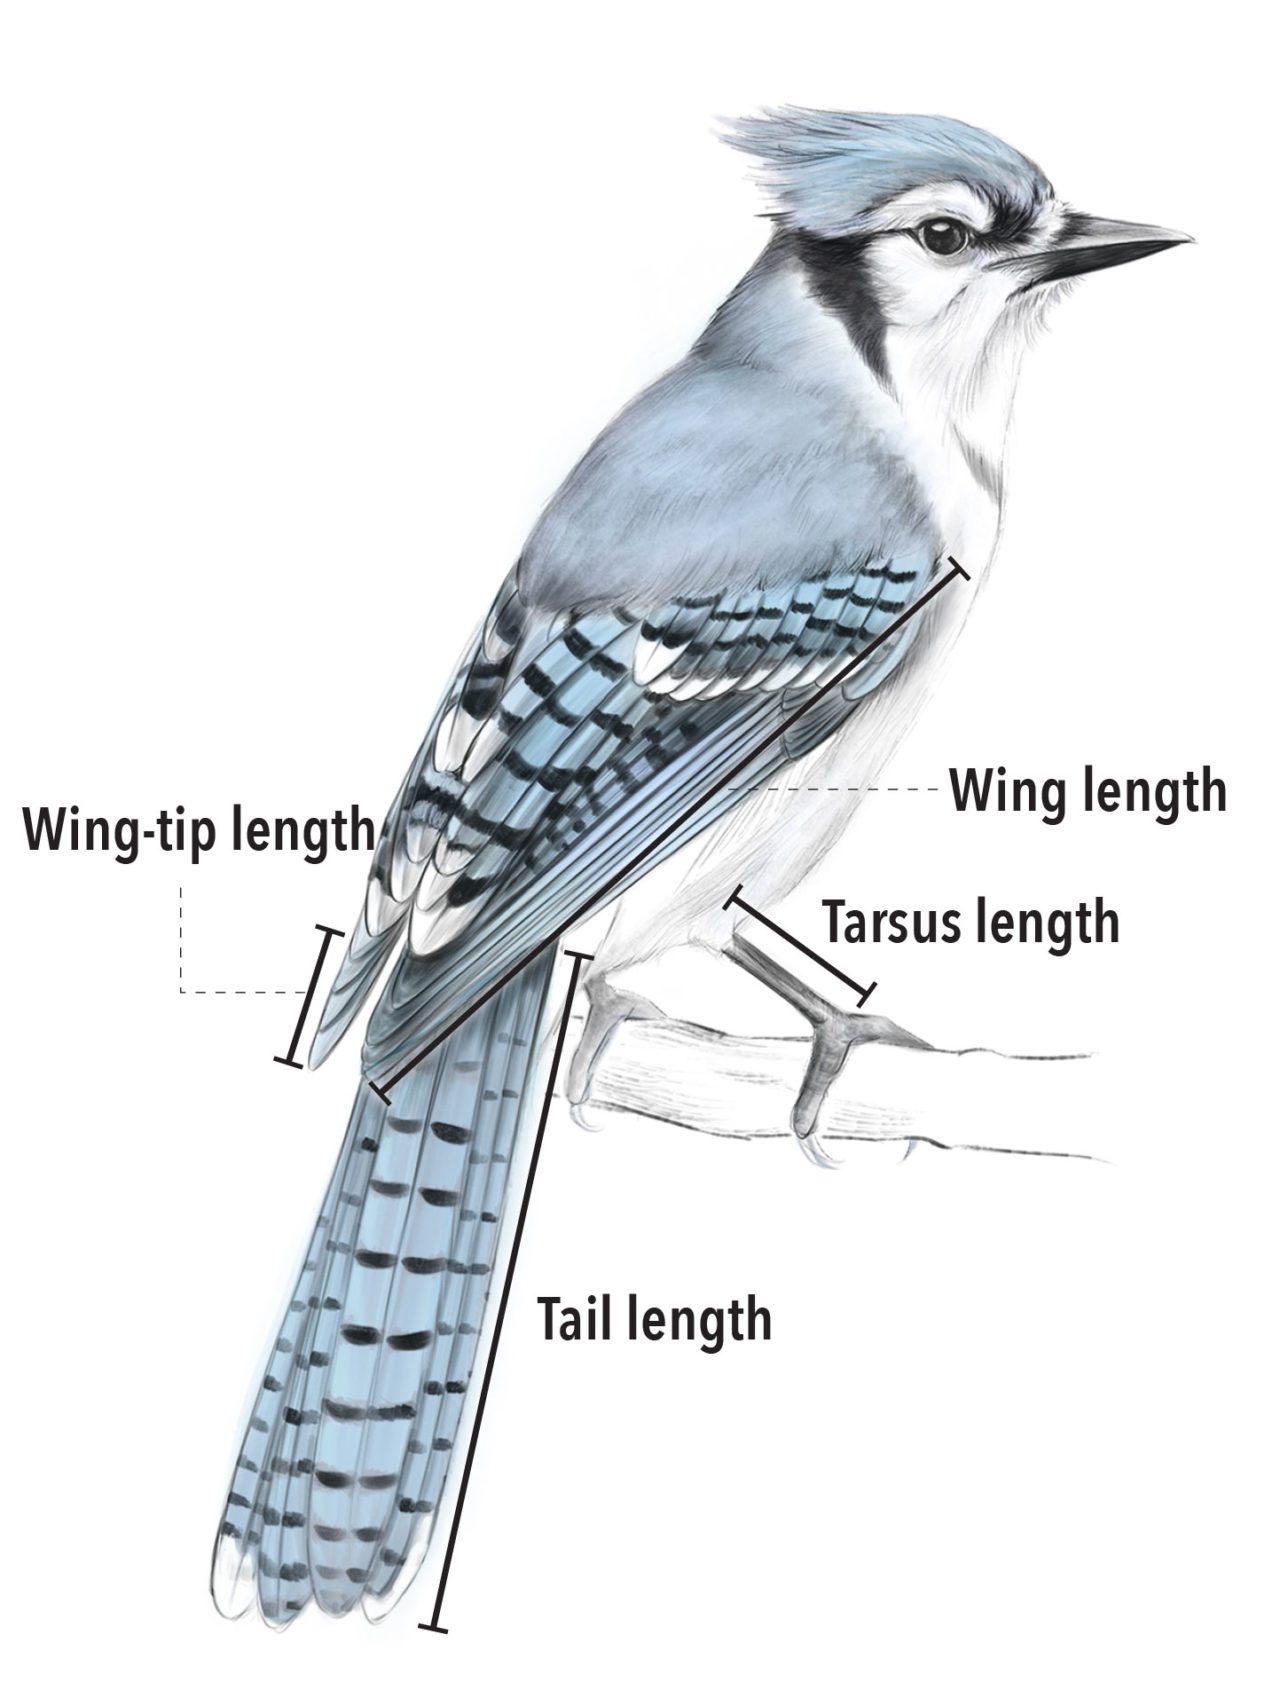 Full body Blue Jay illustration showing wing, tail and tarsus length